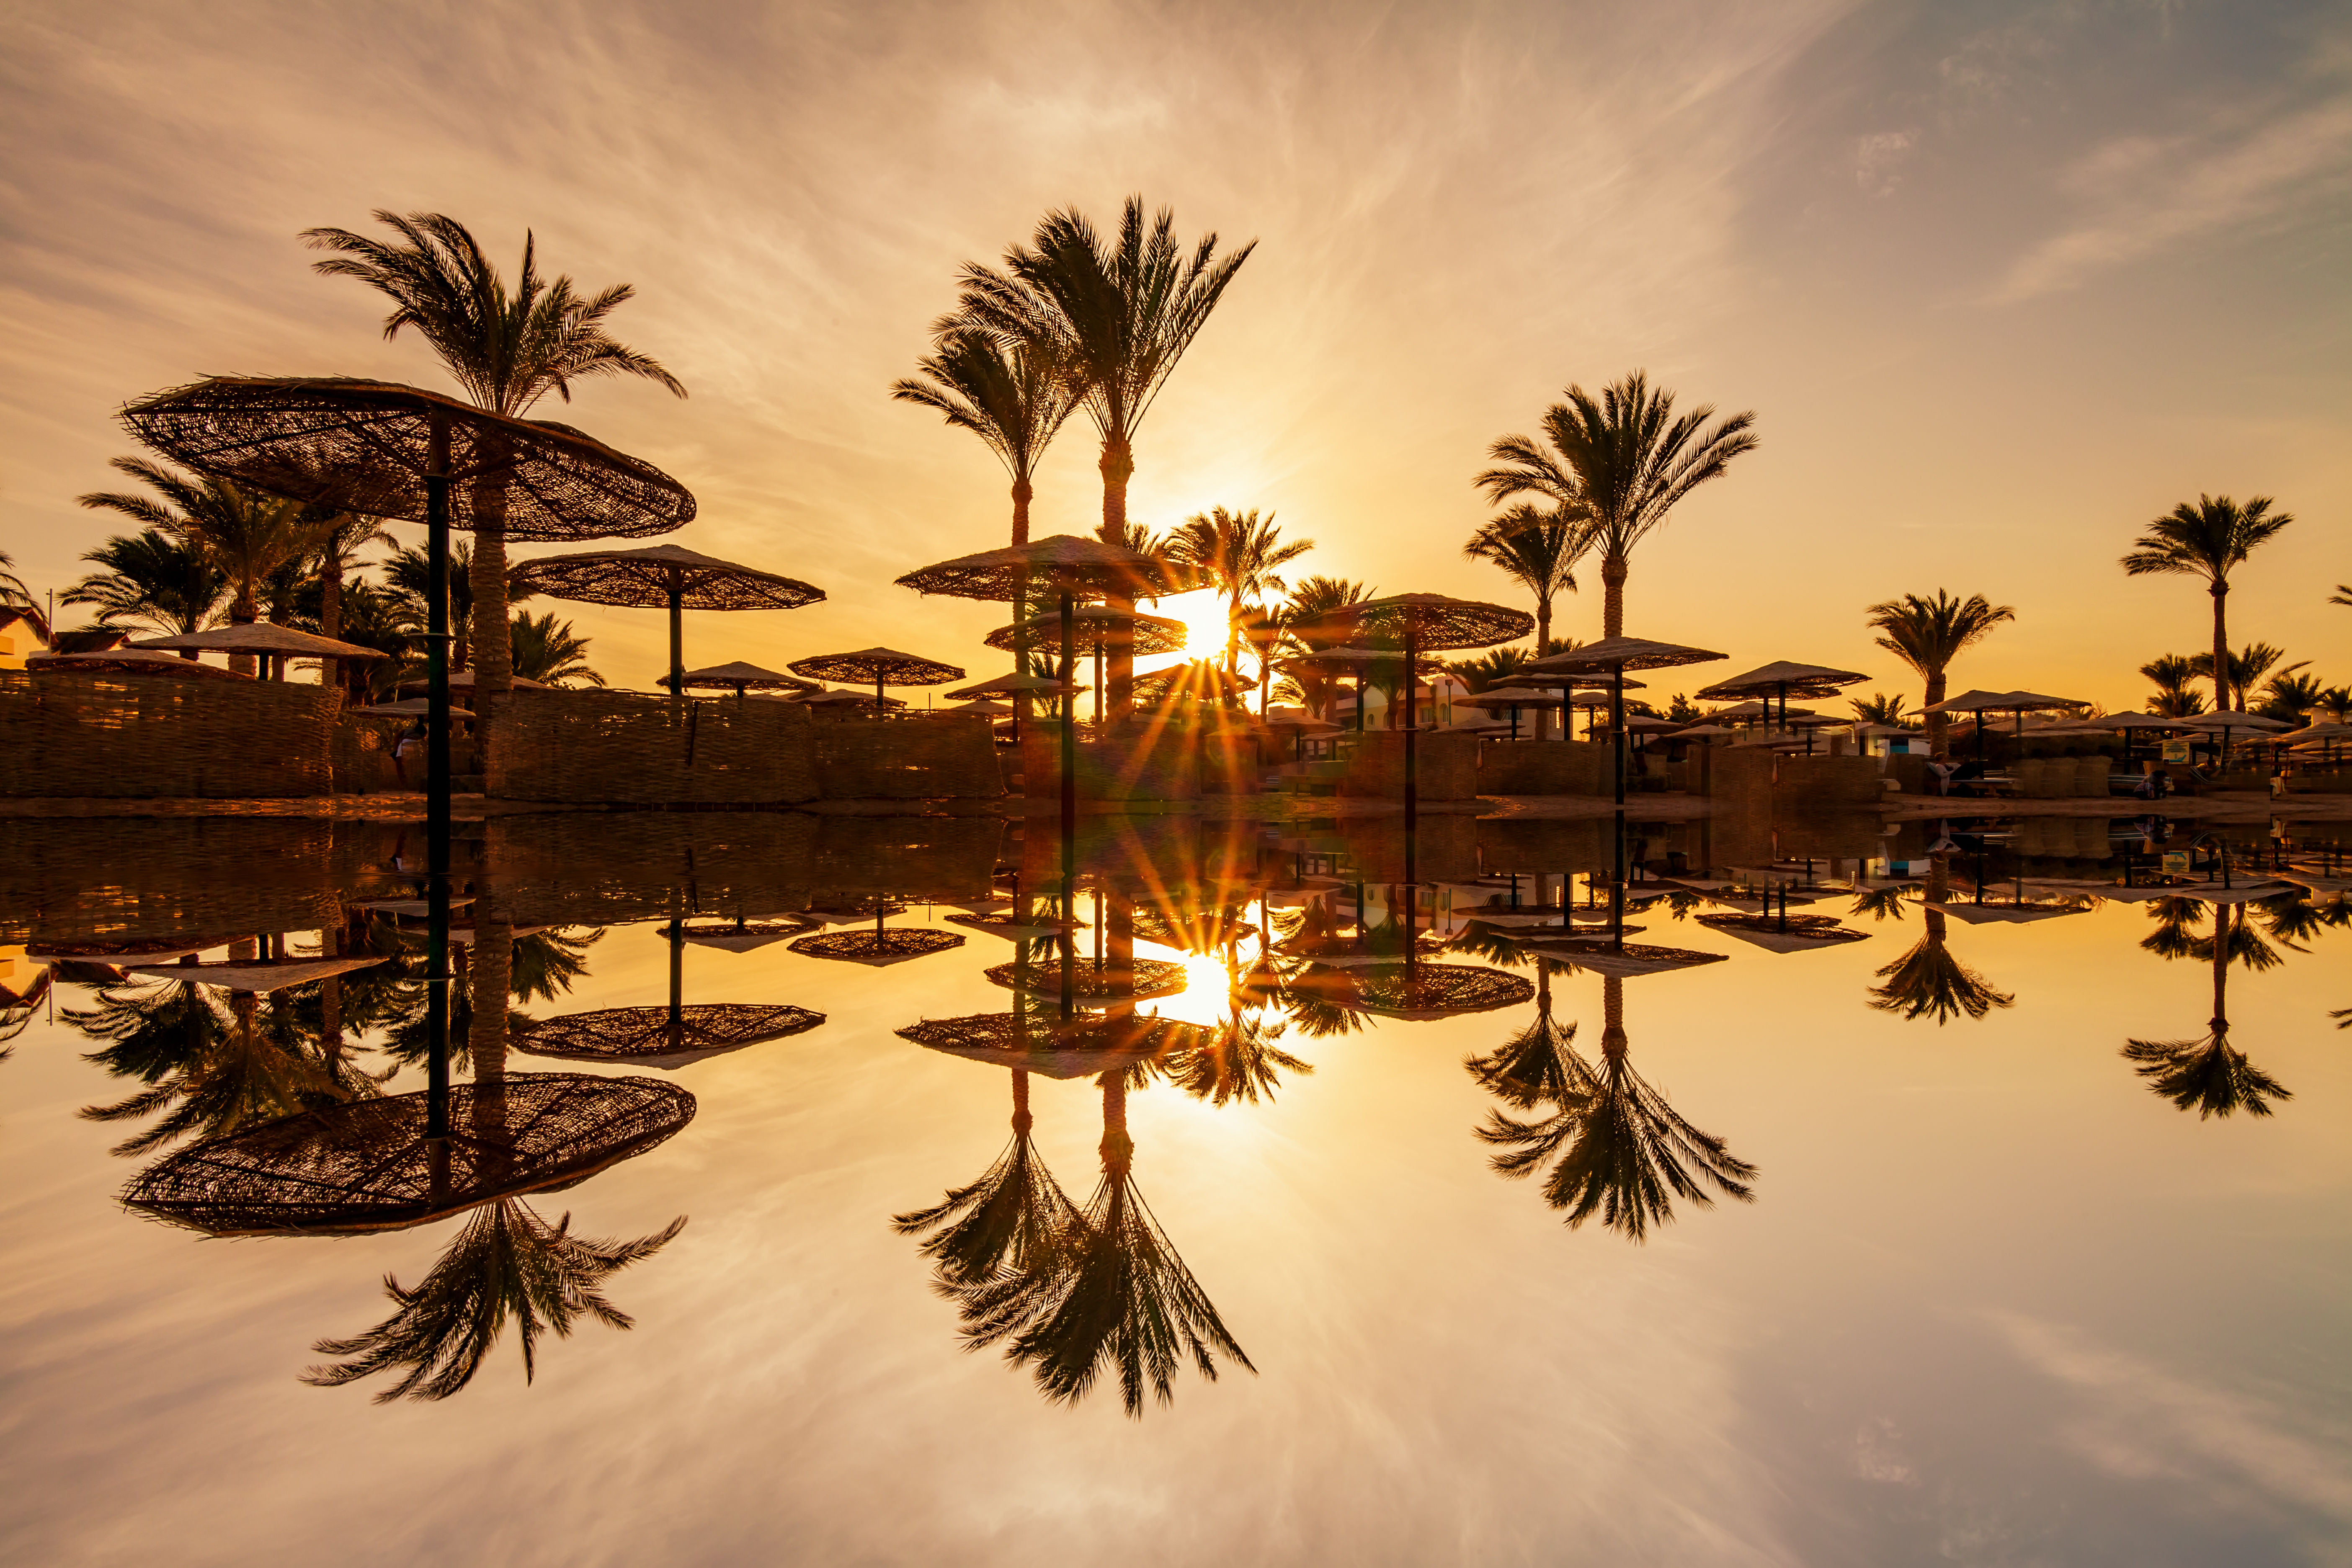 Sunset through palm trees over the Red Sea in Hurghada